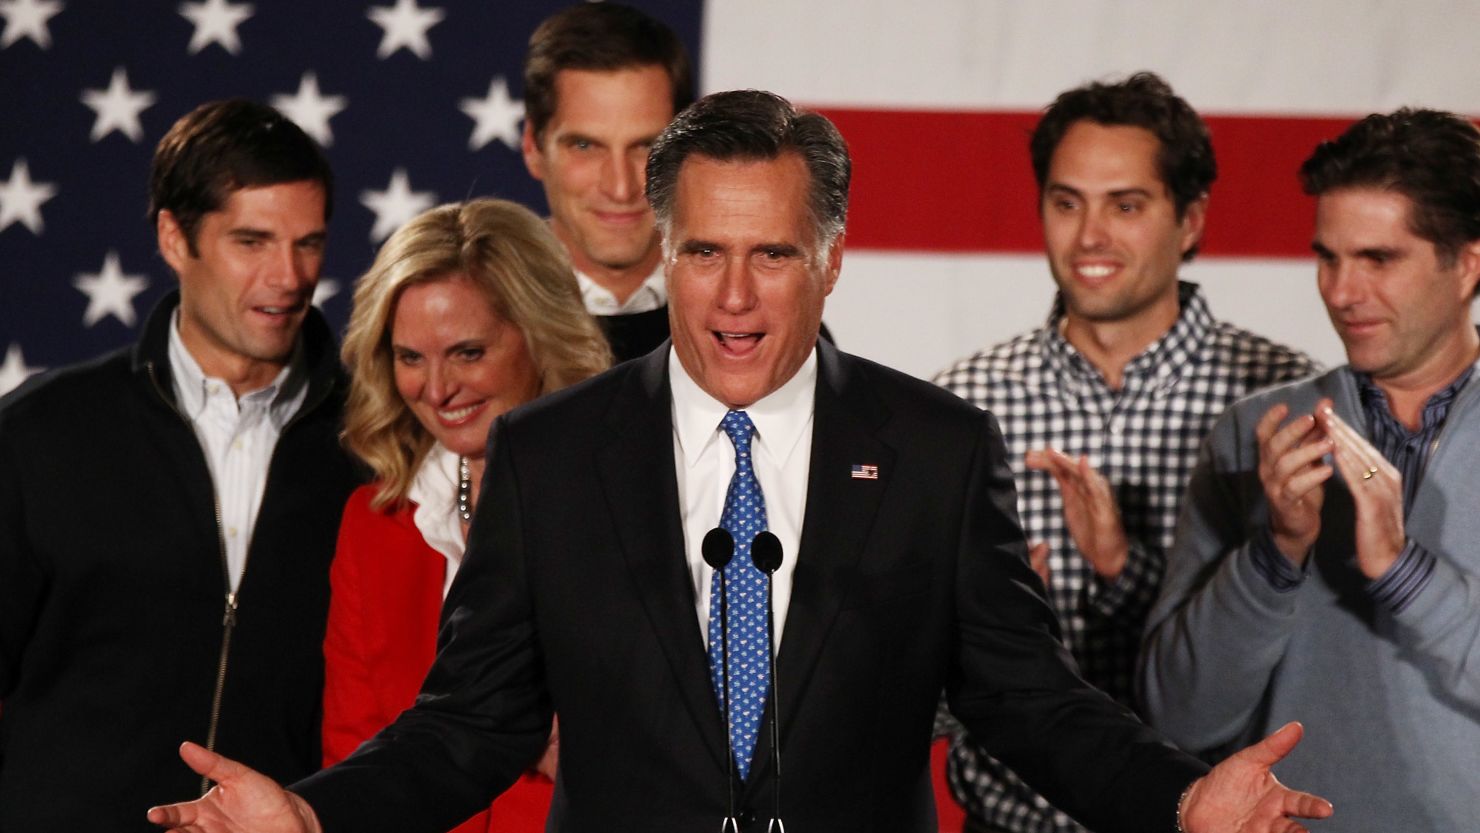 Mitt Romney speaks as his wife Ann Romney and their sons look on after the very close finish in the Iowa caucus.